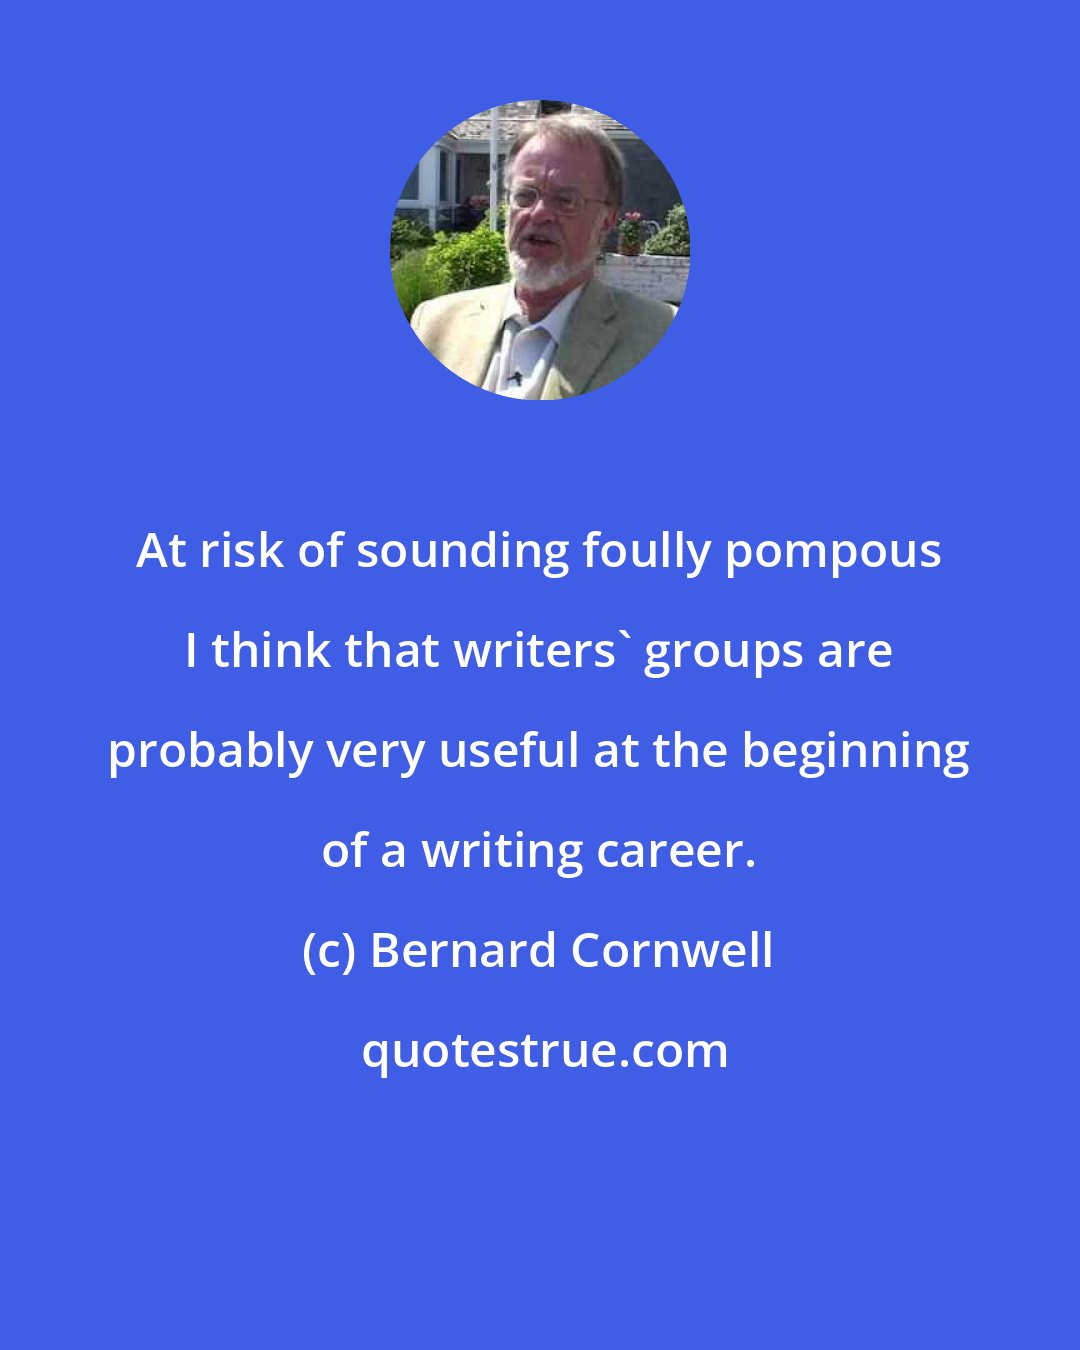 Bernard Cornwell: At risk of sounding foully pompous I think that writers' groups are probably very useful at the beginning of a writing career.